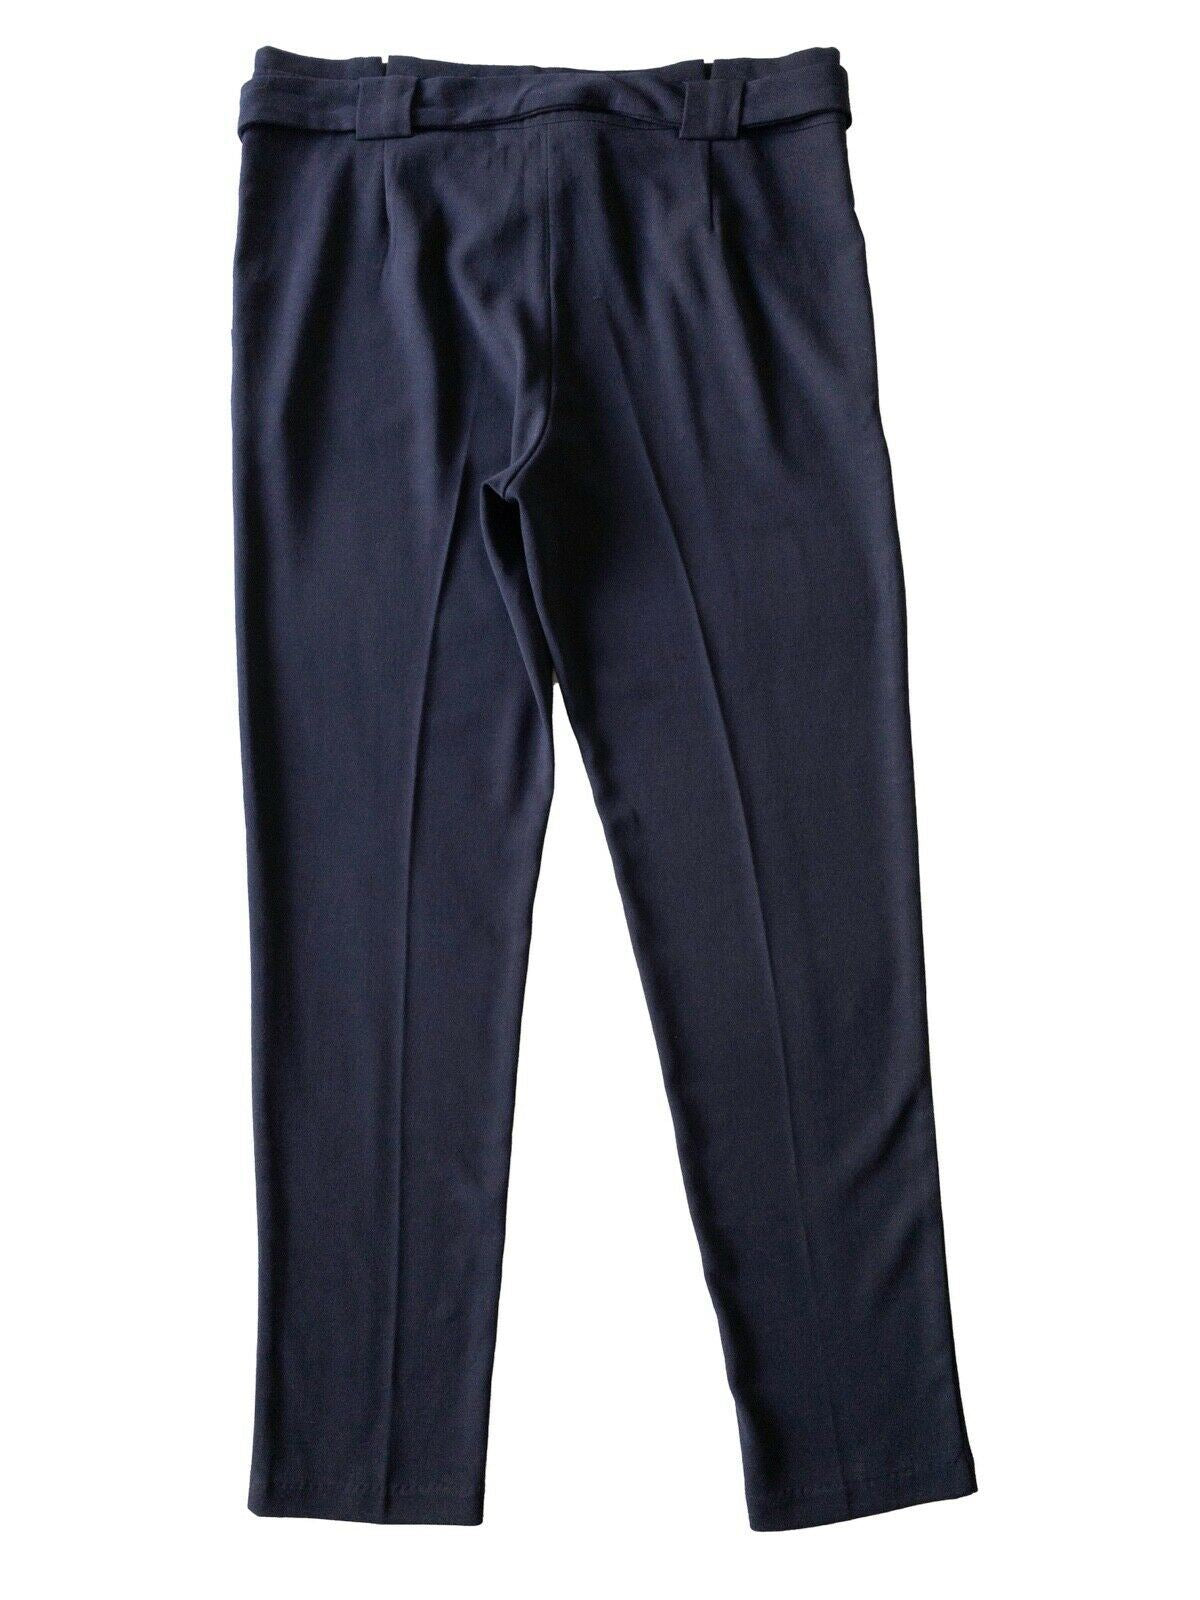 Grace & Mila Navy Paperbag Trousers Size 8, 10, 12